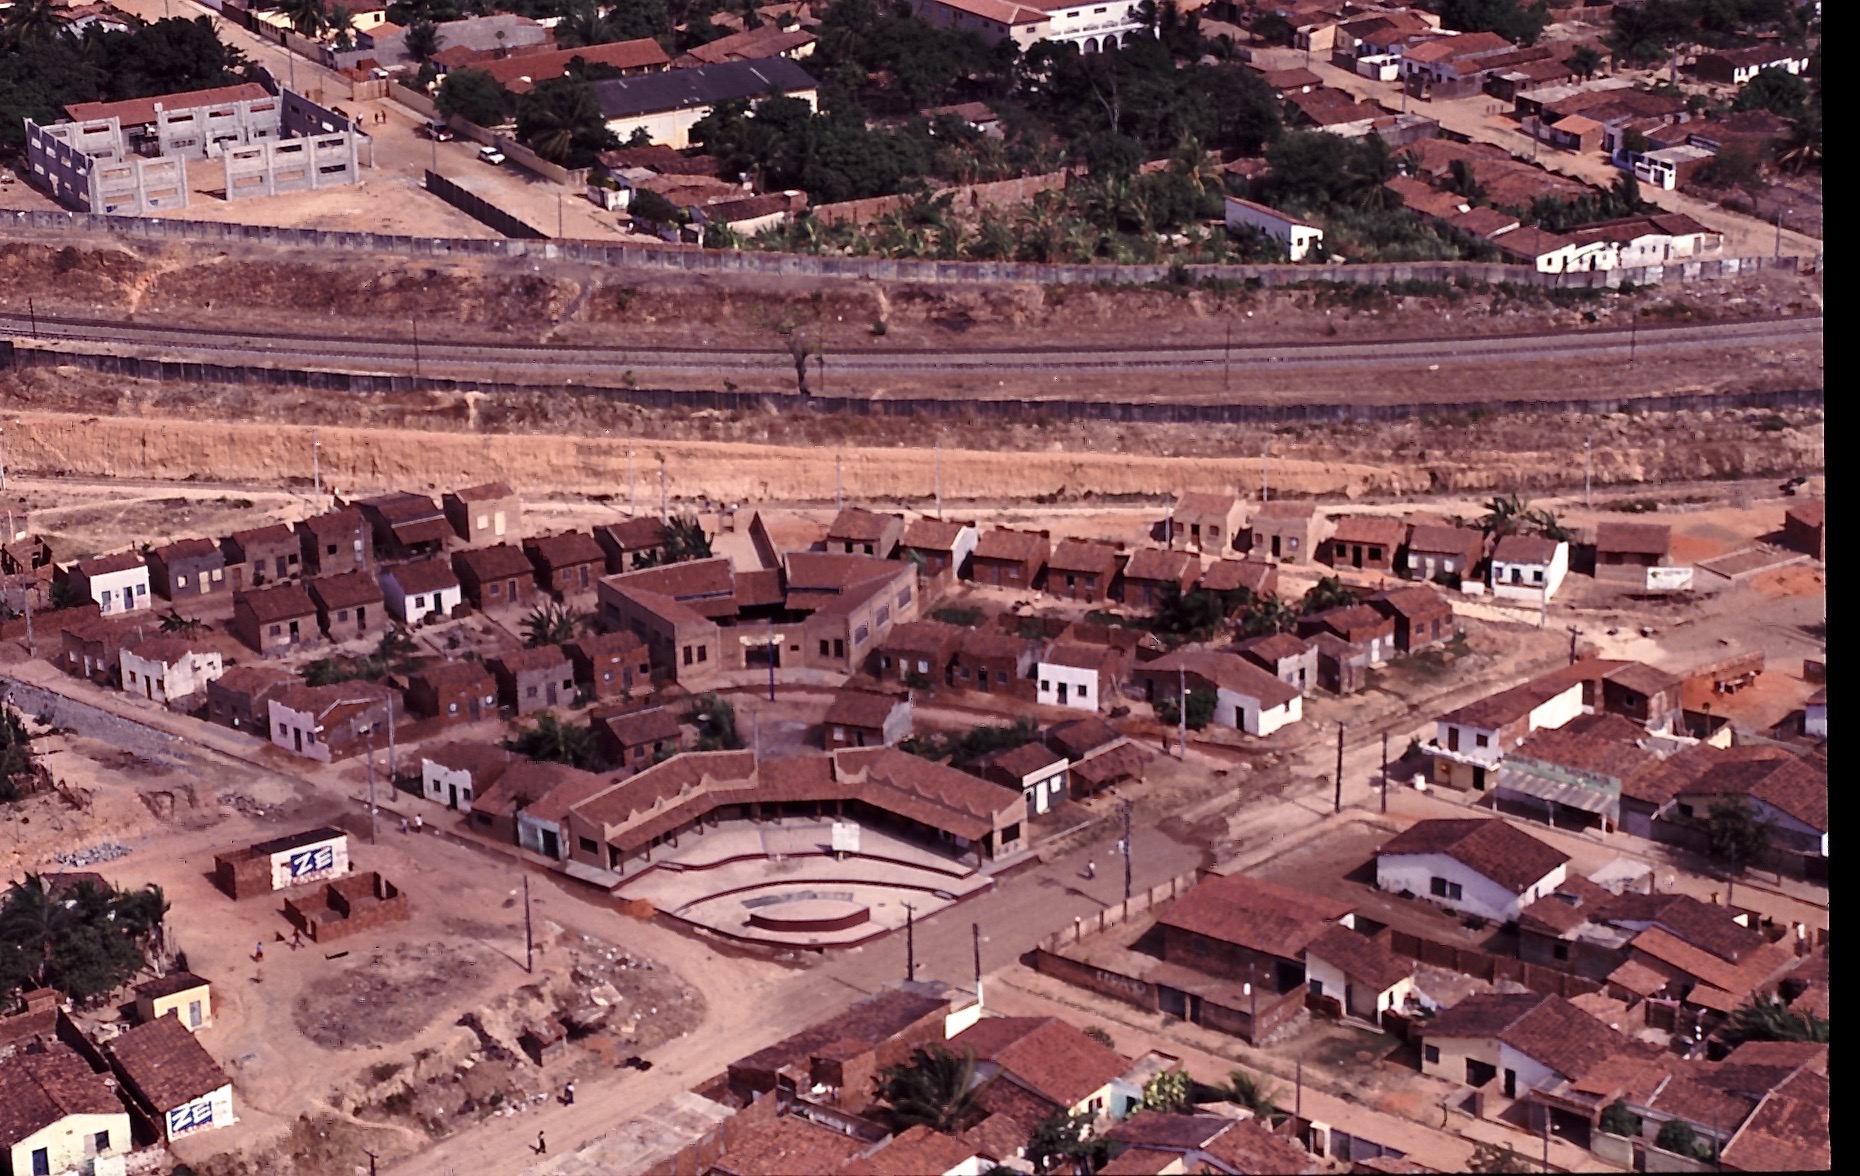 Photo 9: View of the Conjunto when it was almost finished, taken from an ultralight aircraft. The daycare center is in the middle, and just in front of it are the stores and the square. The workshop and the micro district aren’t visible. The construction was only possible because the land was a collective property and the decision to do their own construction was made by the community. On the right, the last six houses are still under construction. Photo: Yves Cabannes